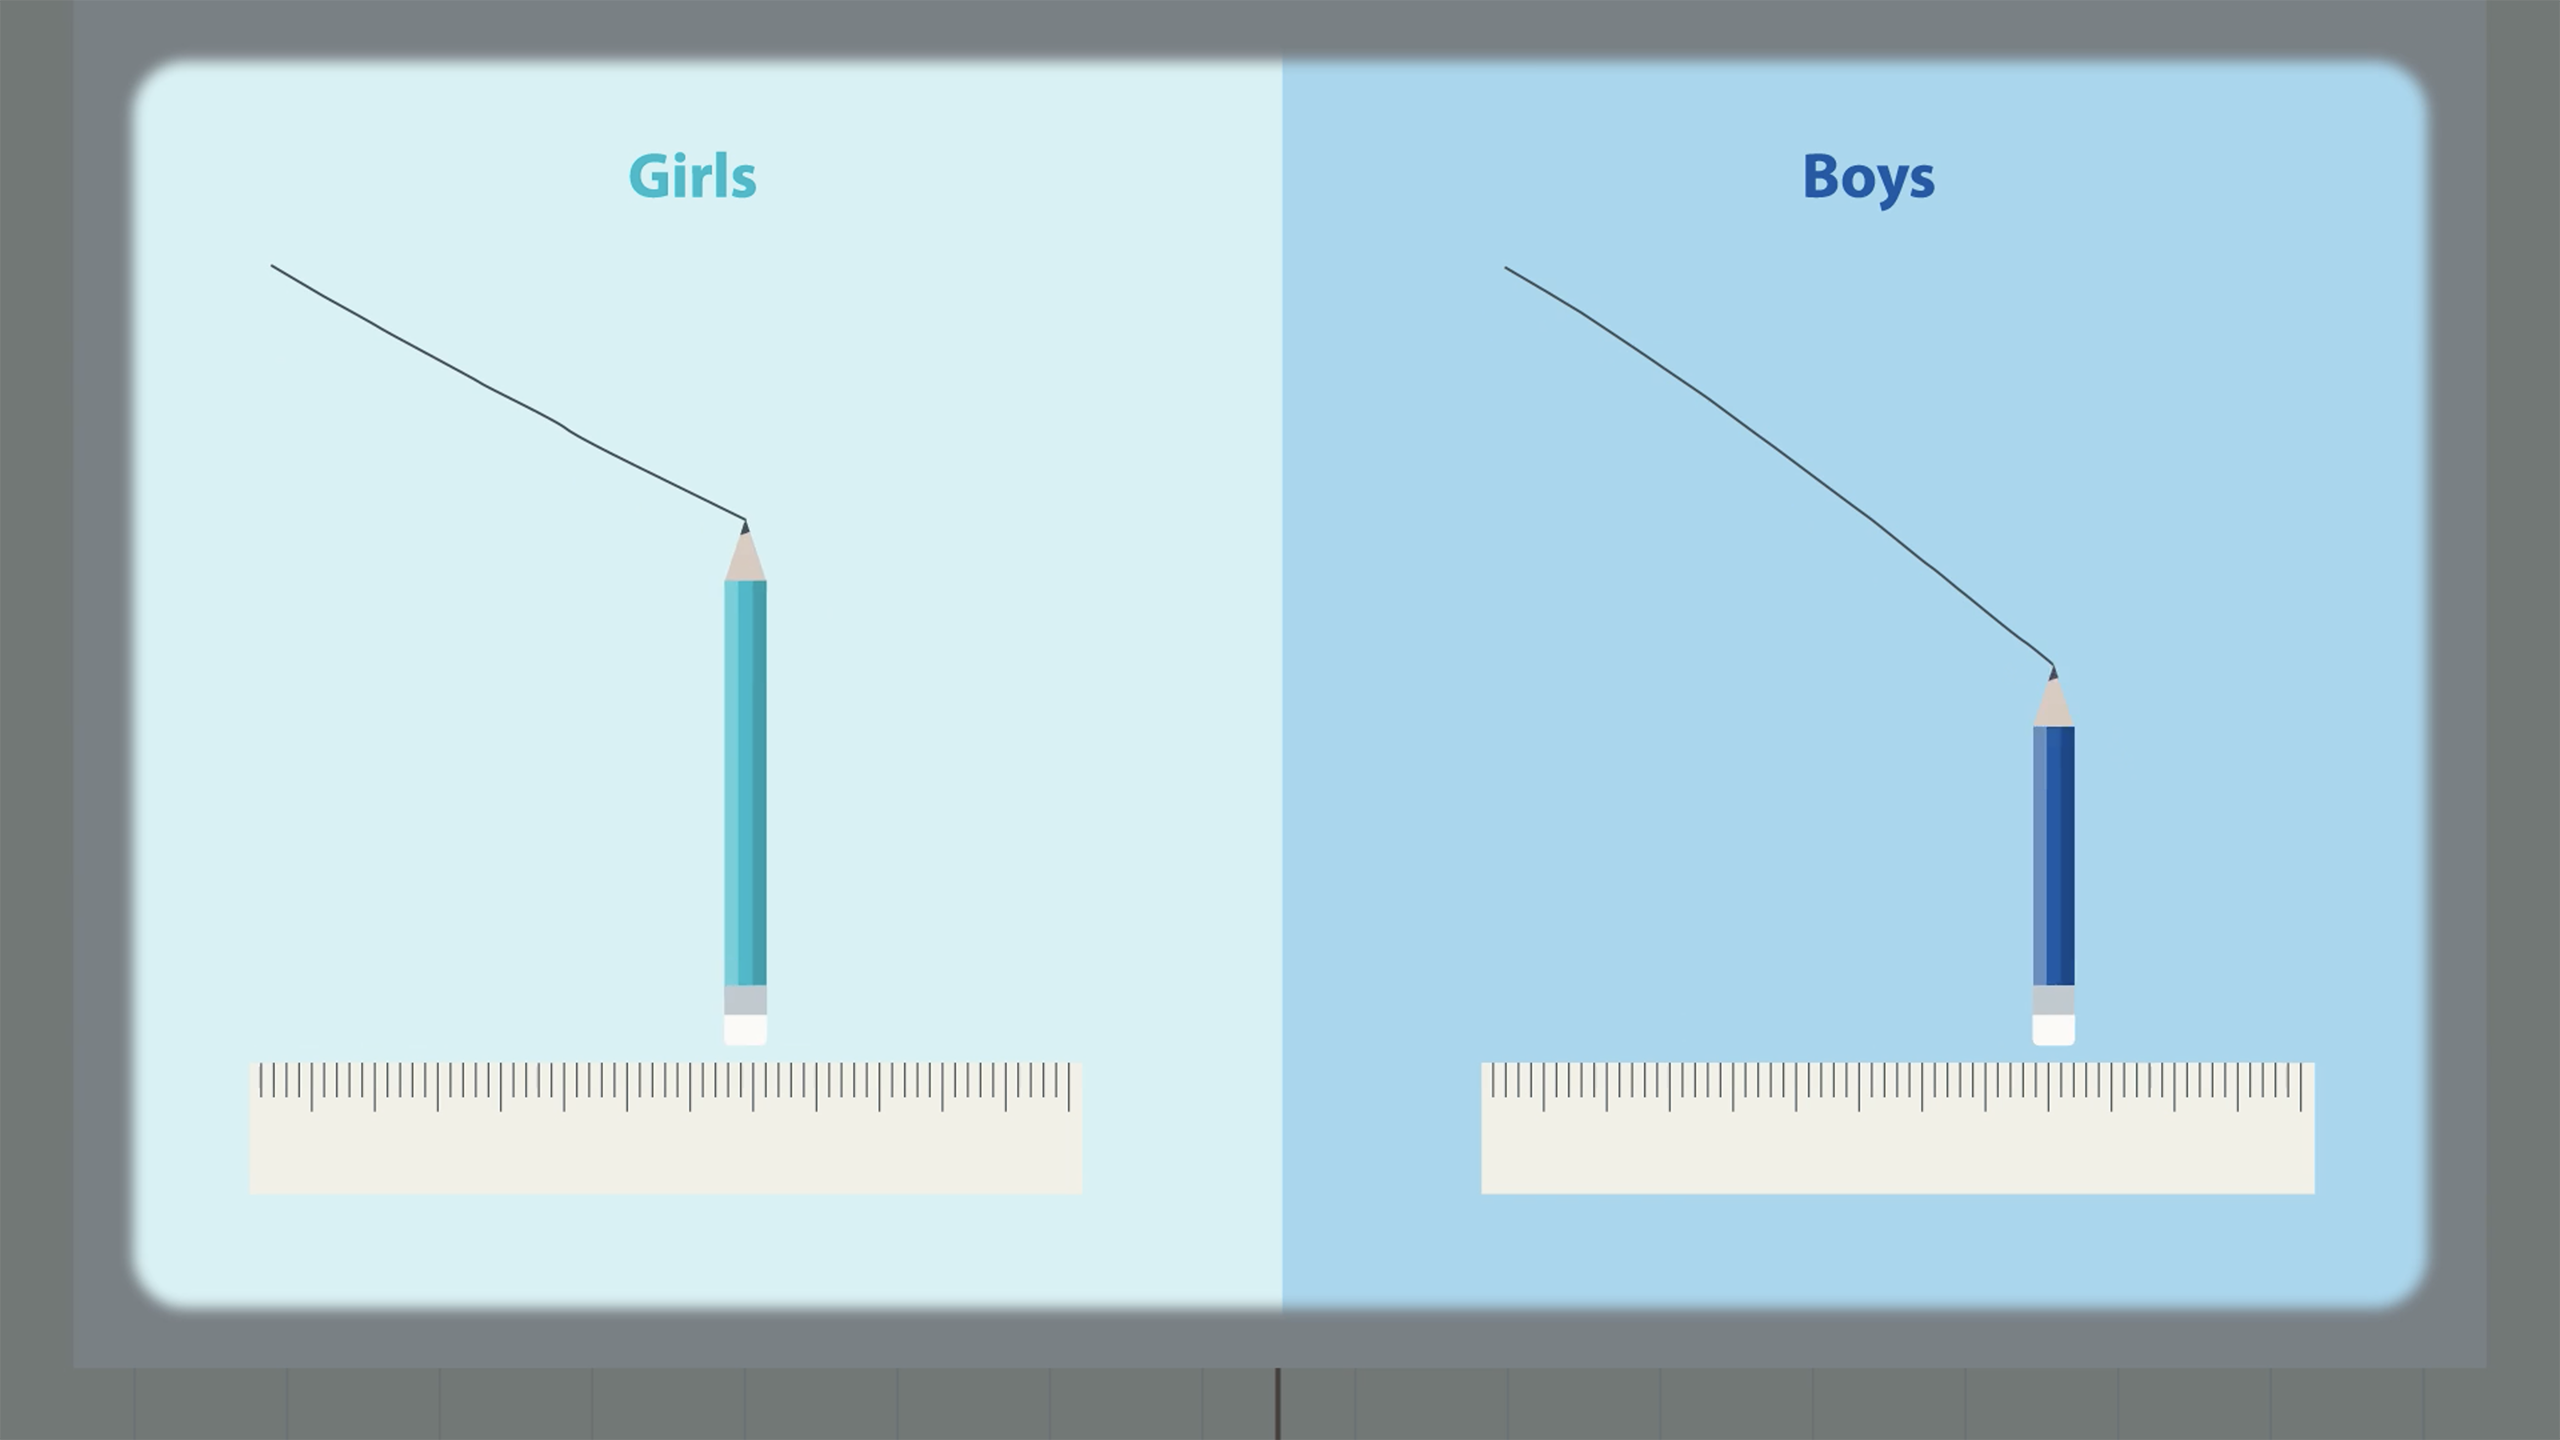 Infographic showing education rates for girls and boys